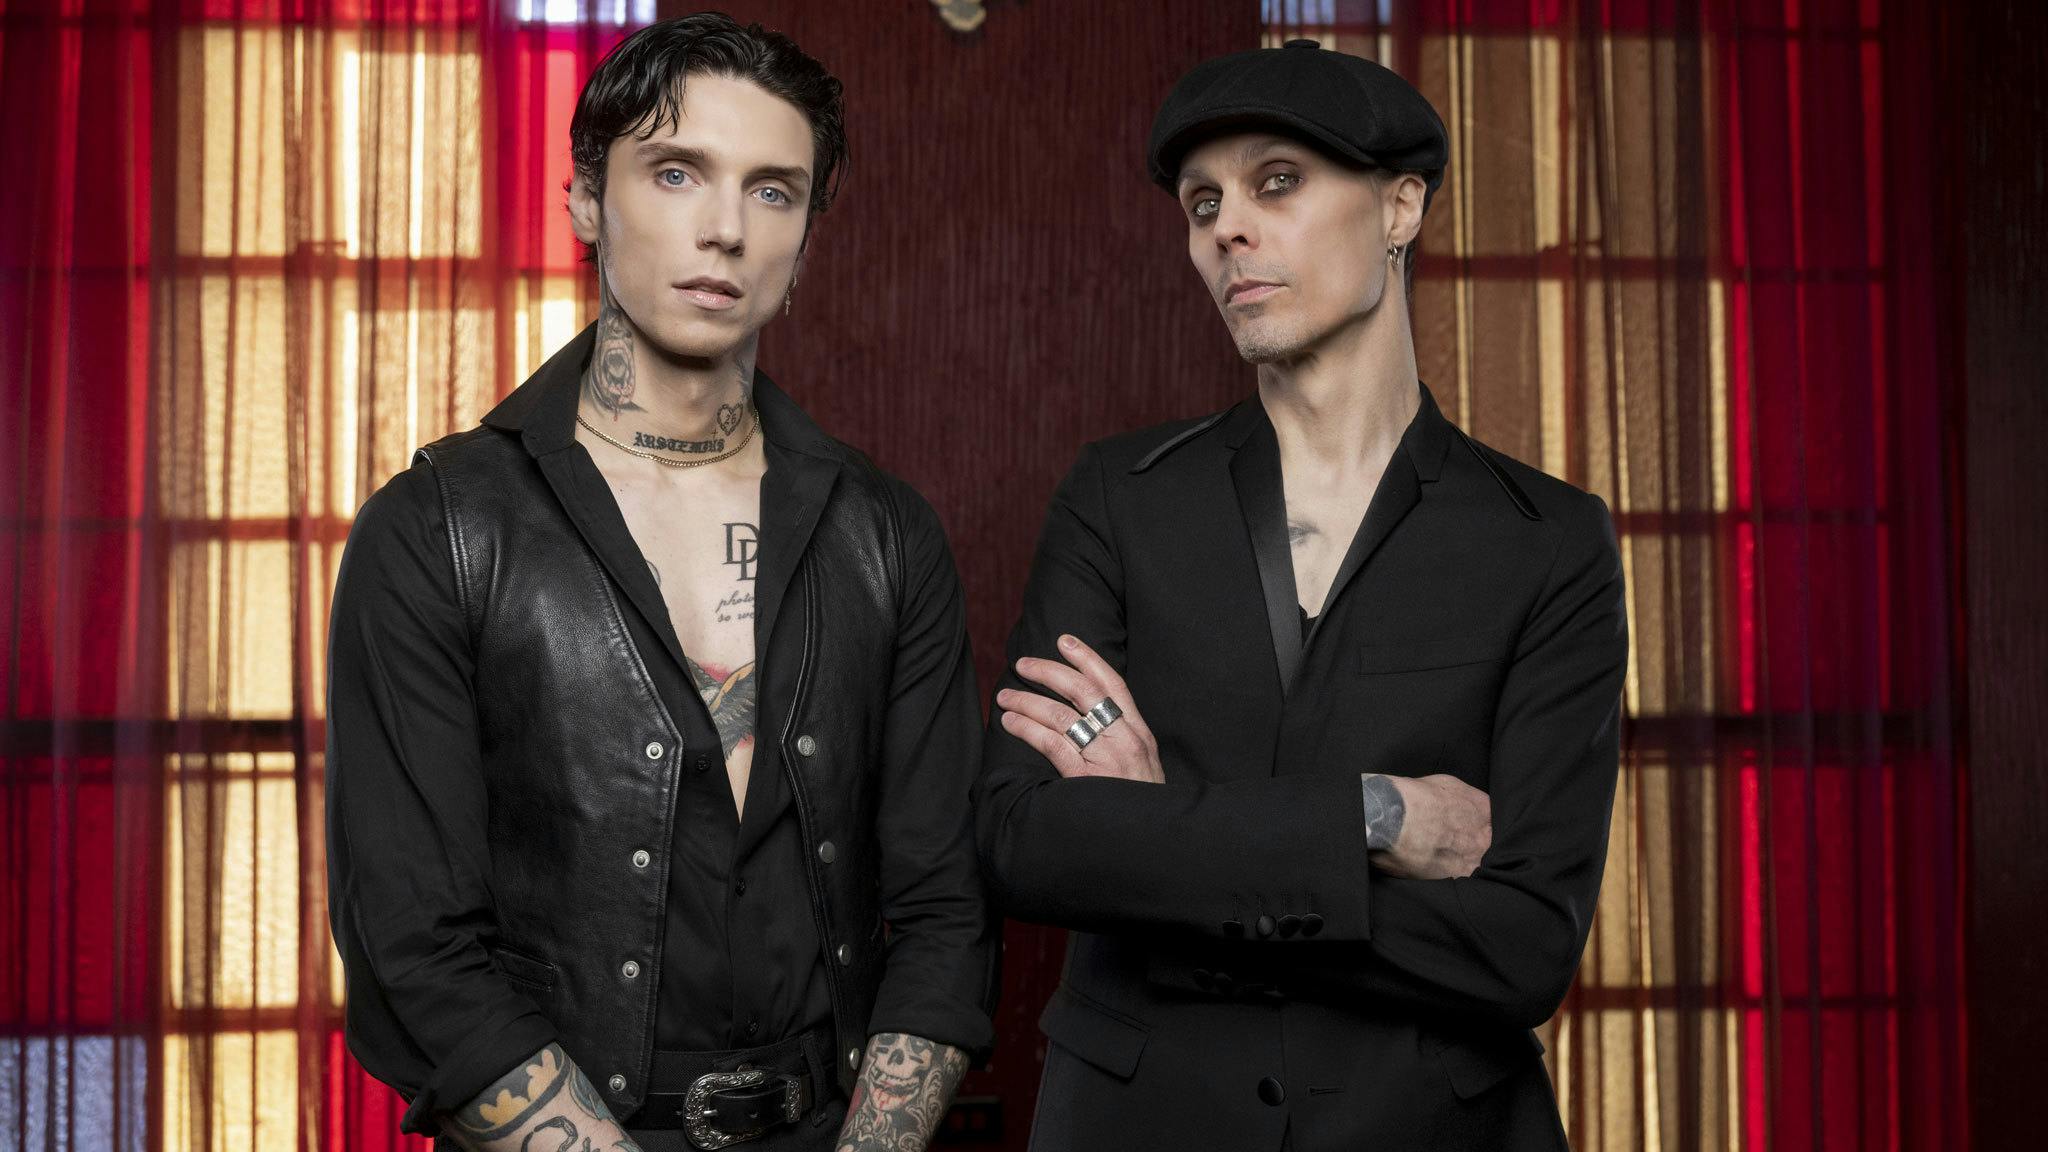 Listen to Black Veil Brides’ new cover of Temple Of Love featuring Ville Valo